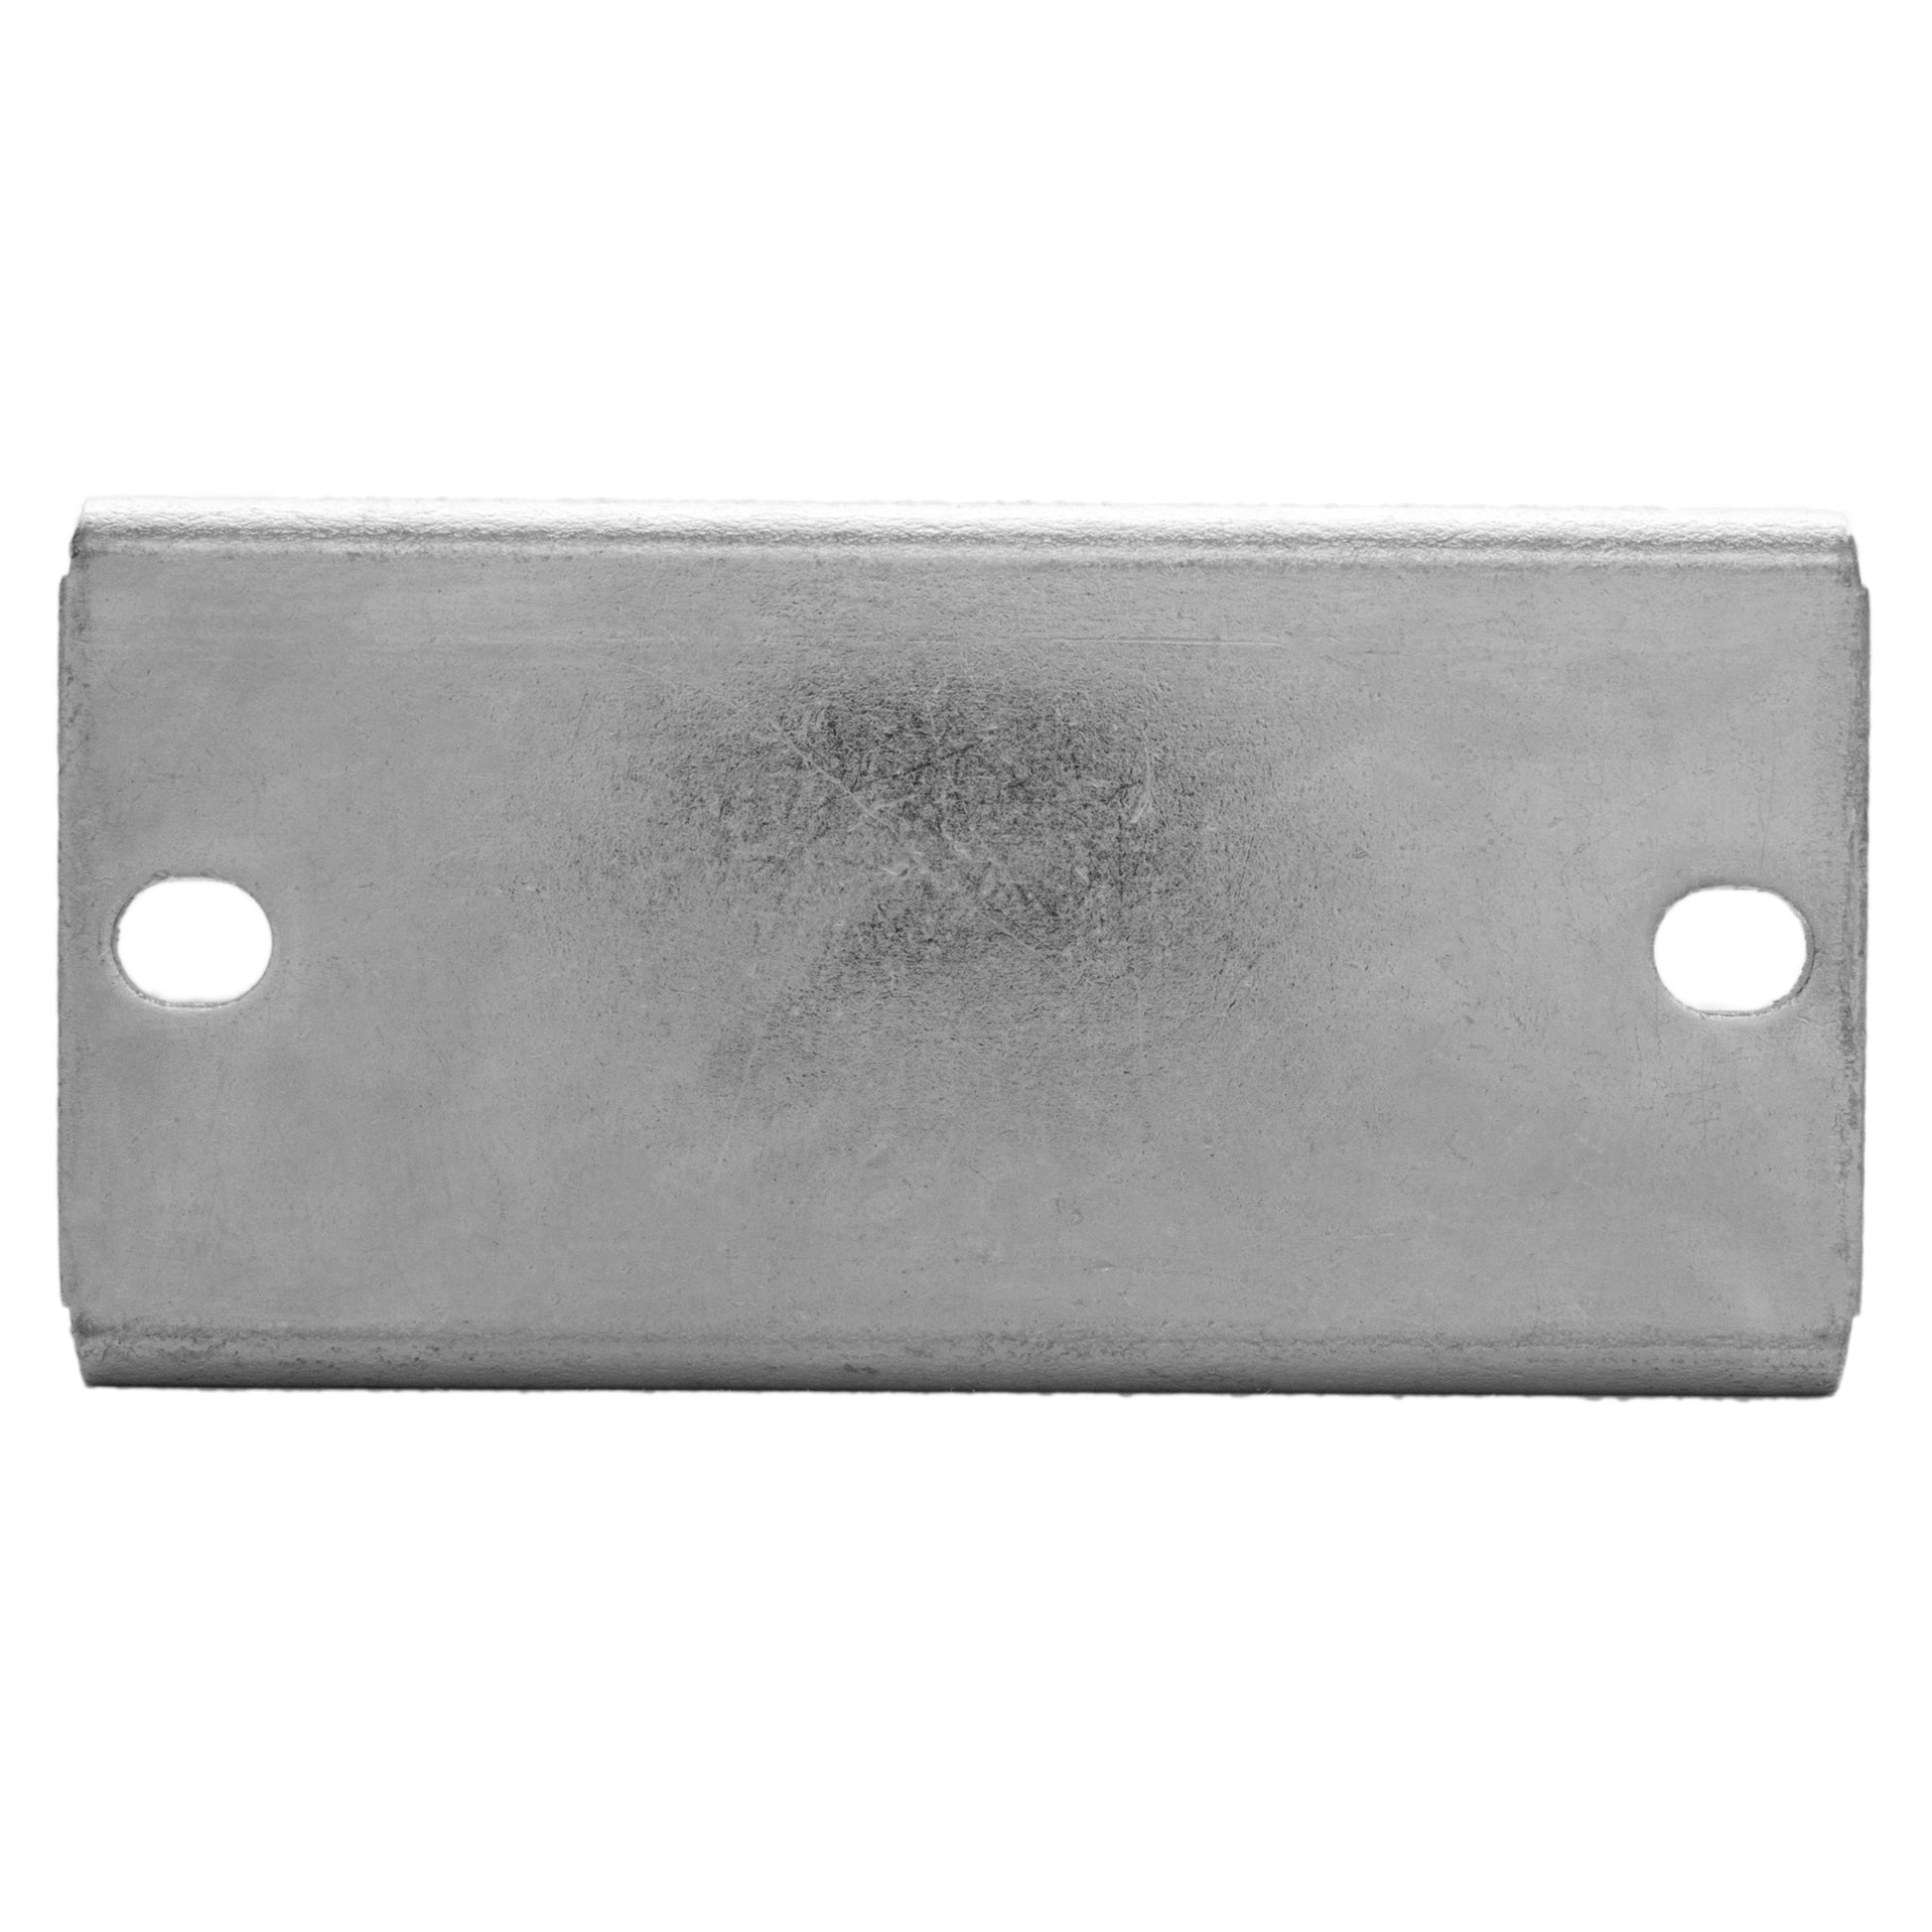 Load image into Gallery viewer, CBA300 Ceramic Latch Magnet Channel Assembly - Top View